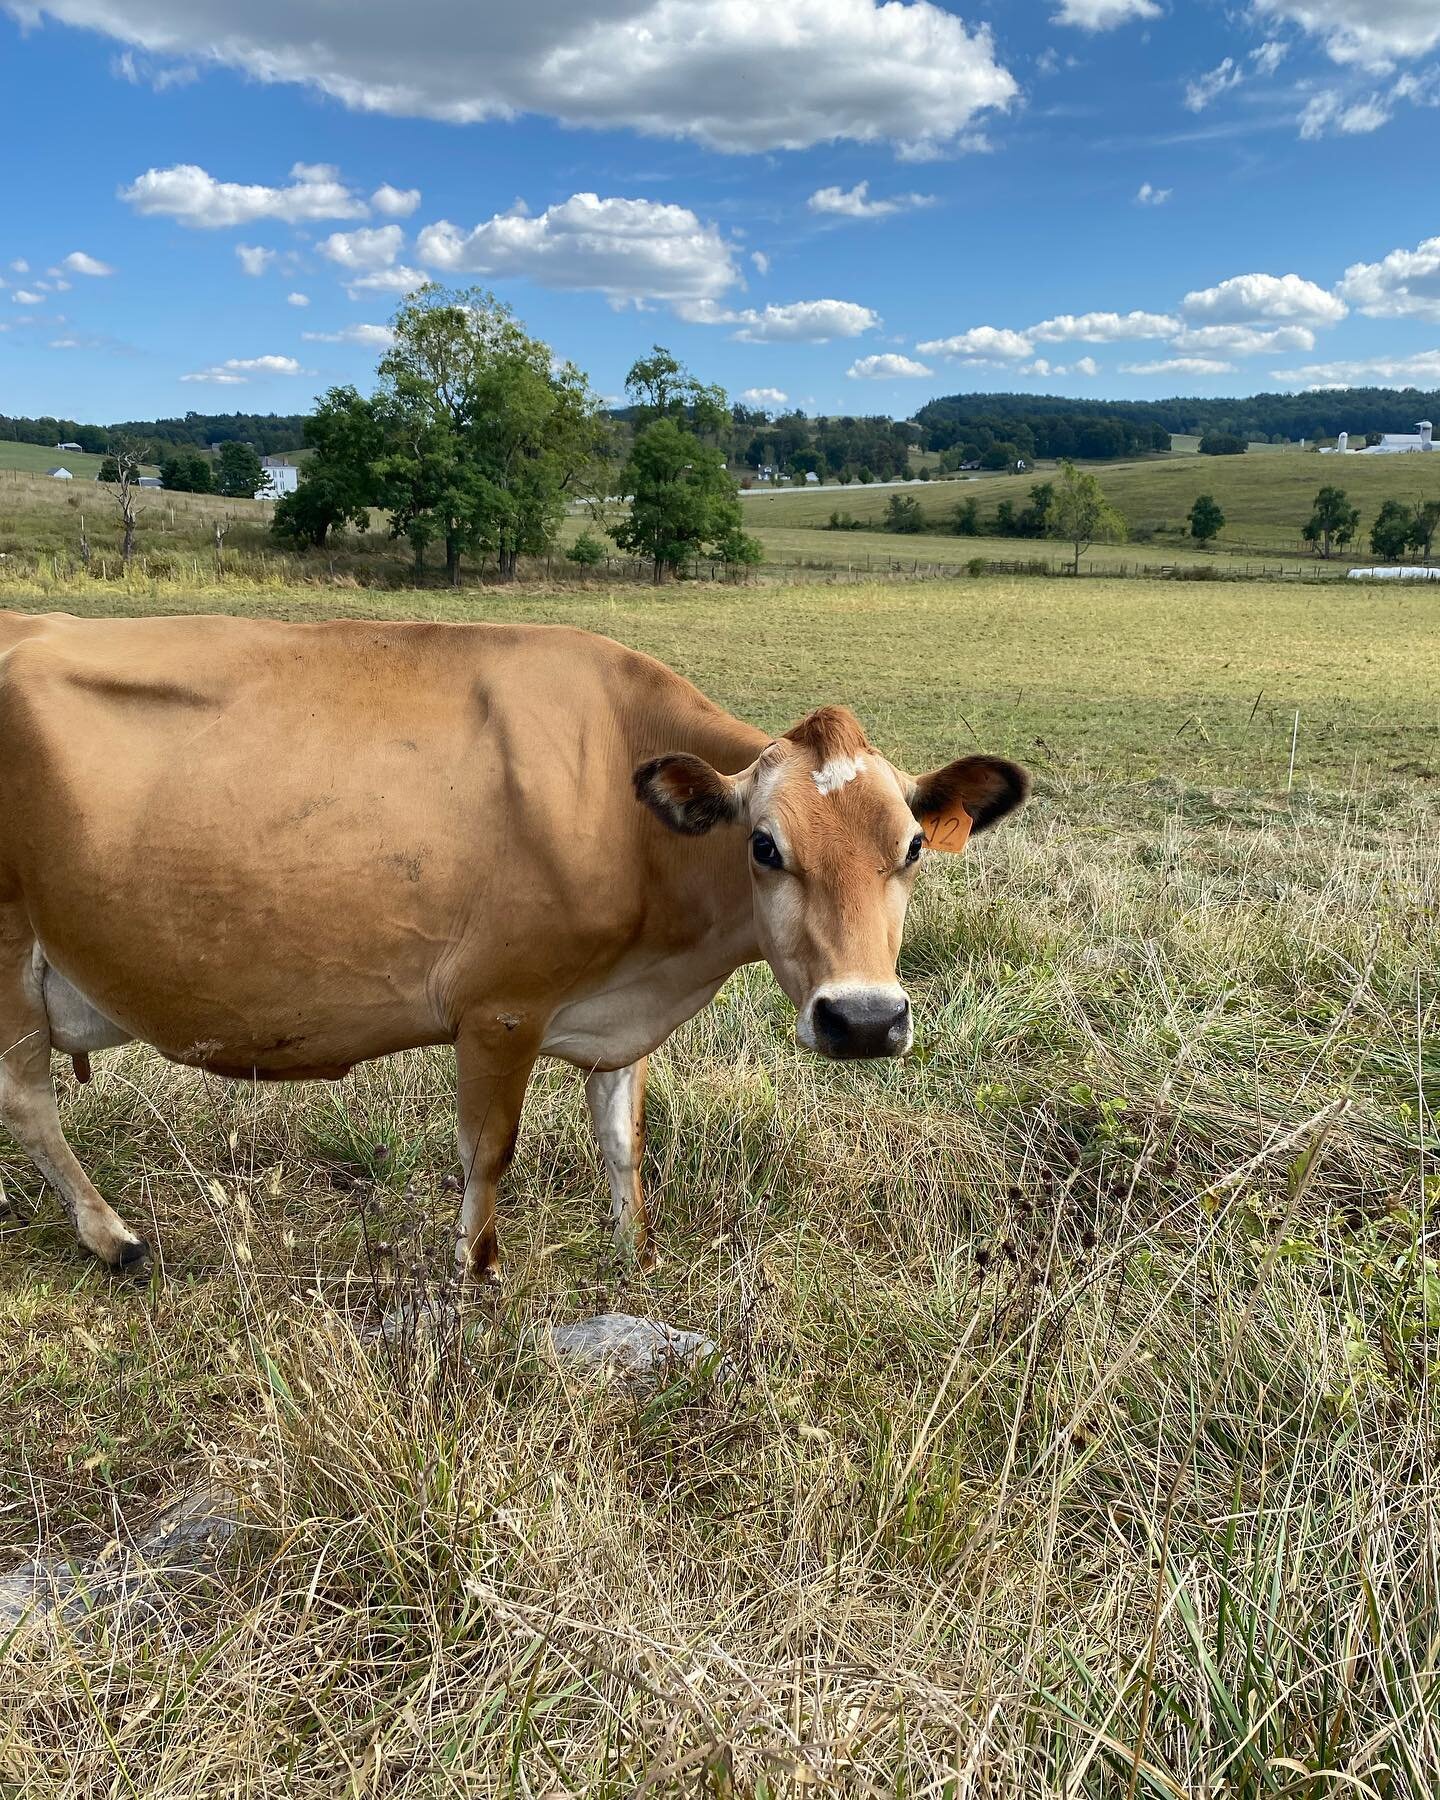 Meet &quot;12&quot; - (Our cows have either a name or a number). 12 is one of our very favorites! I think she is beautiful with her tan coat and dark black ears and eyes.
12 came to Creambrook from a grazing dairy in 2020 at the beginning of the pand